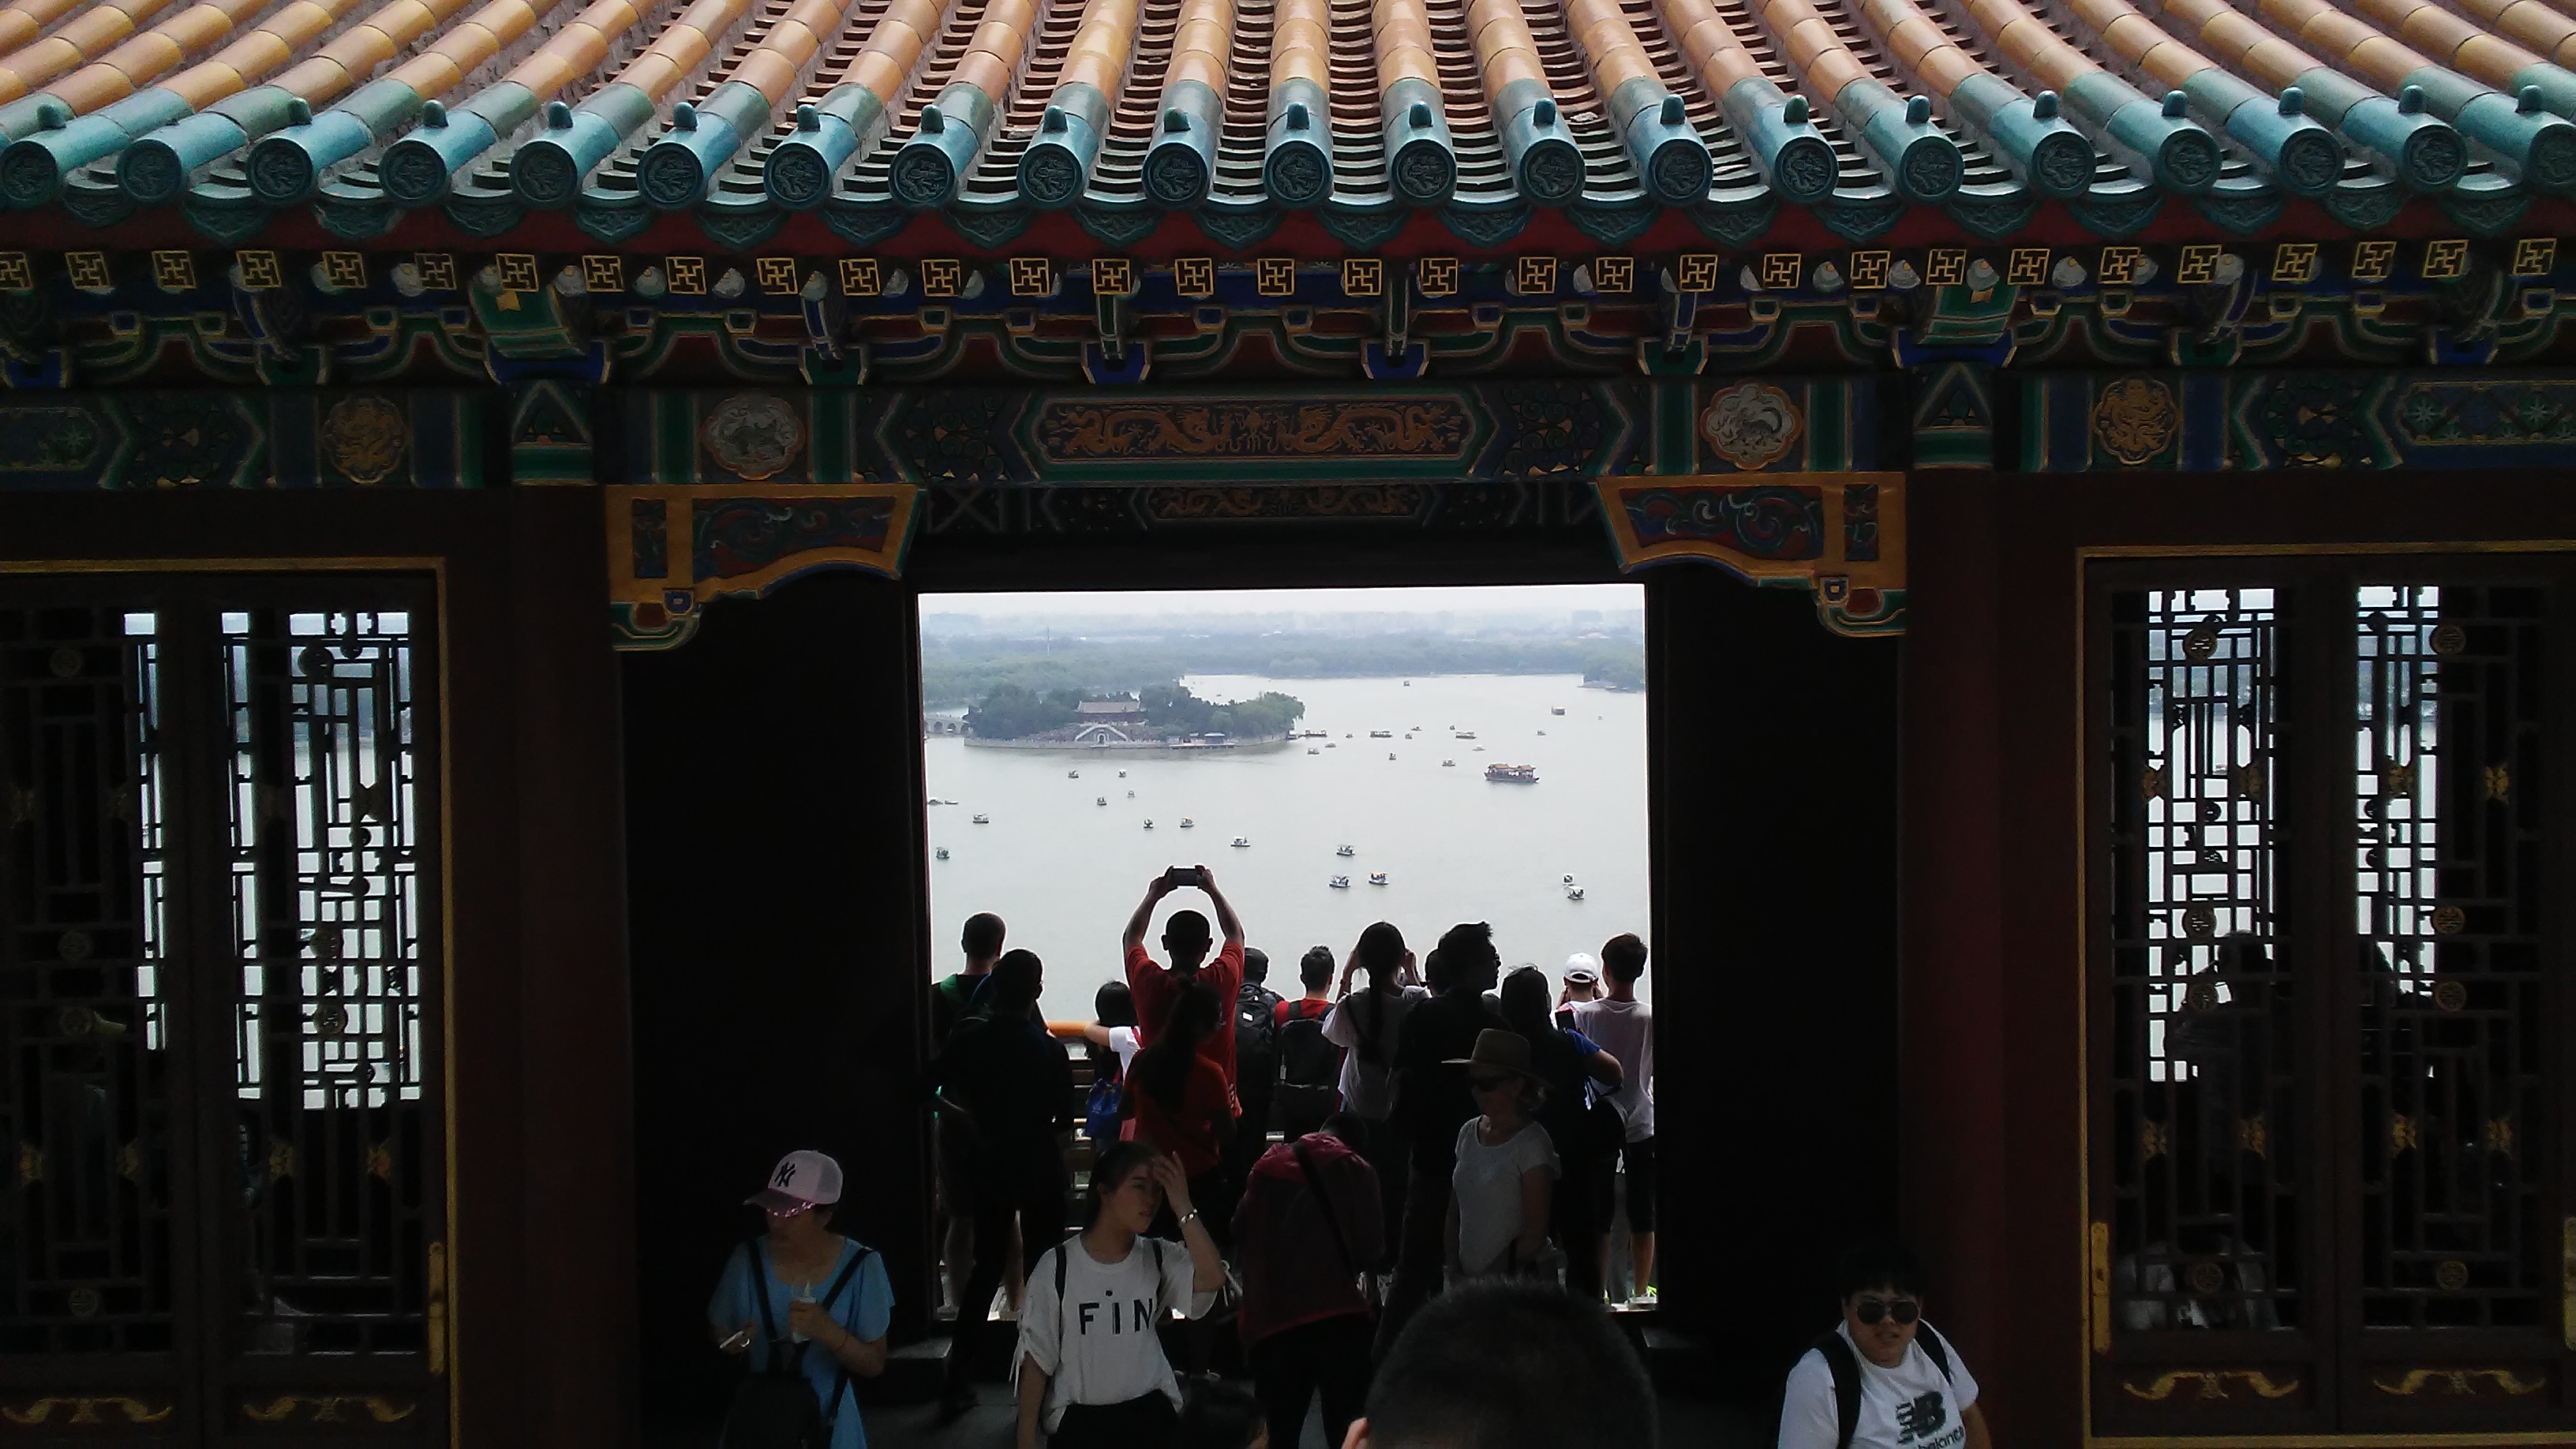 Summer Palace: A crowd attempts to capture the view